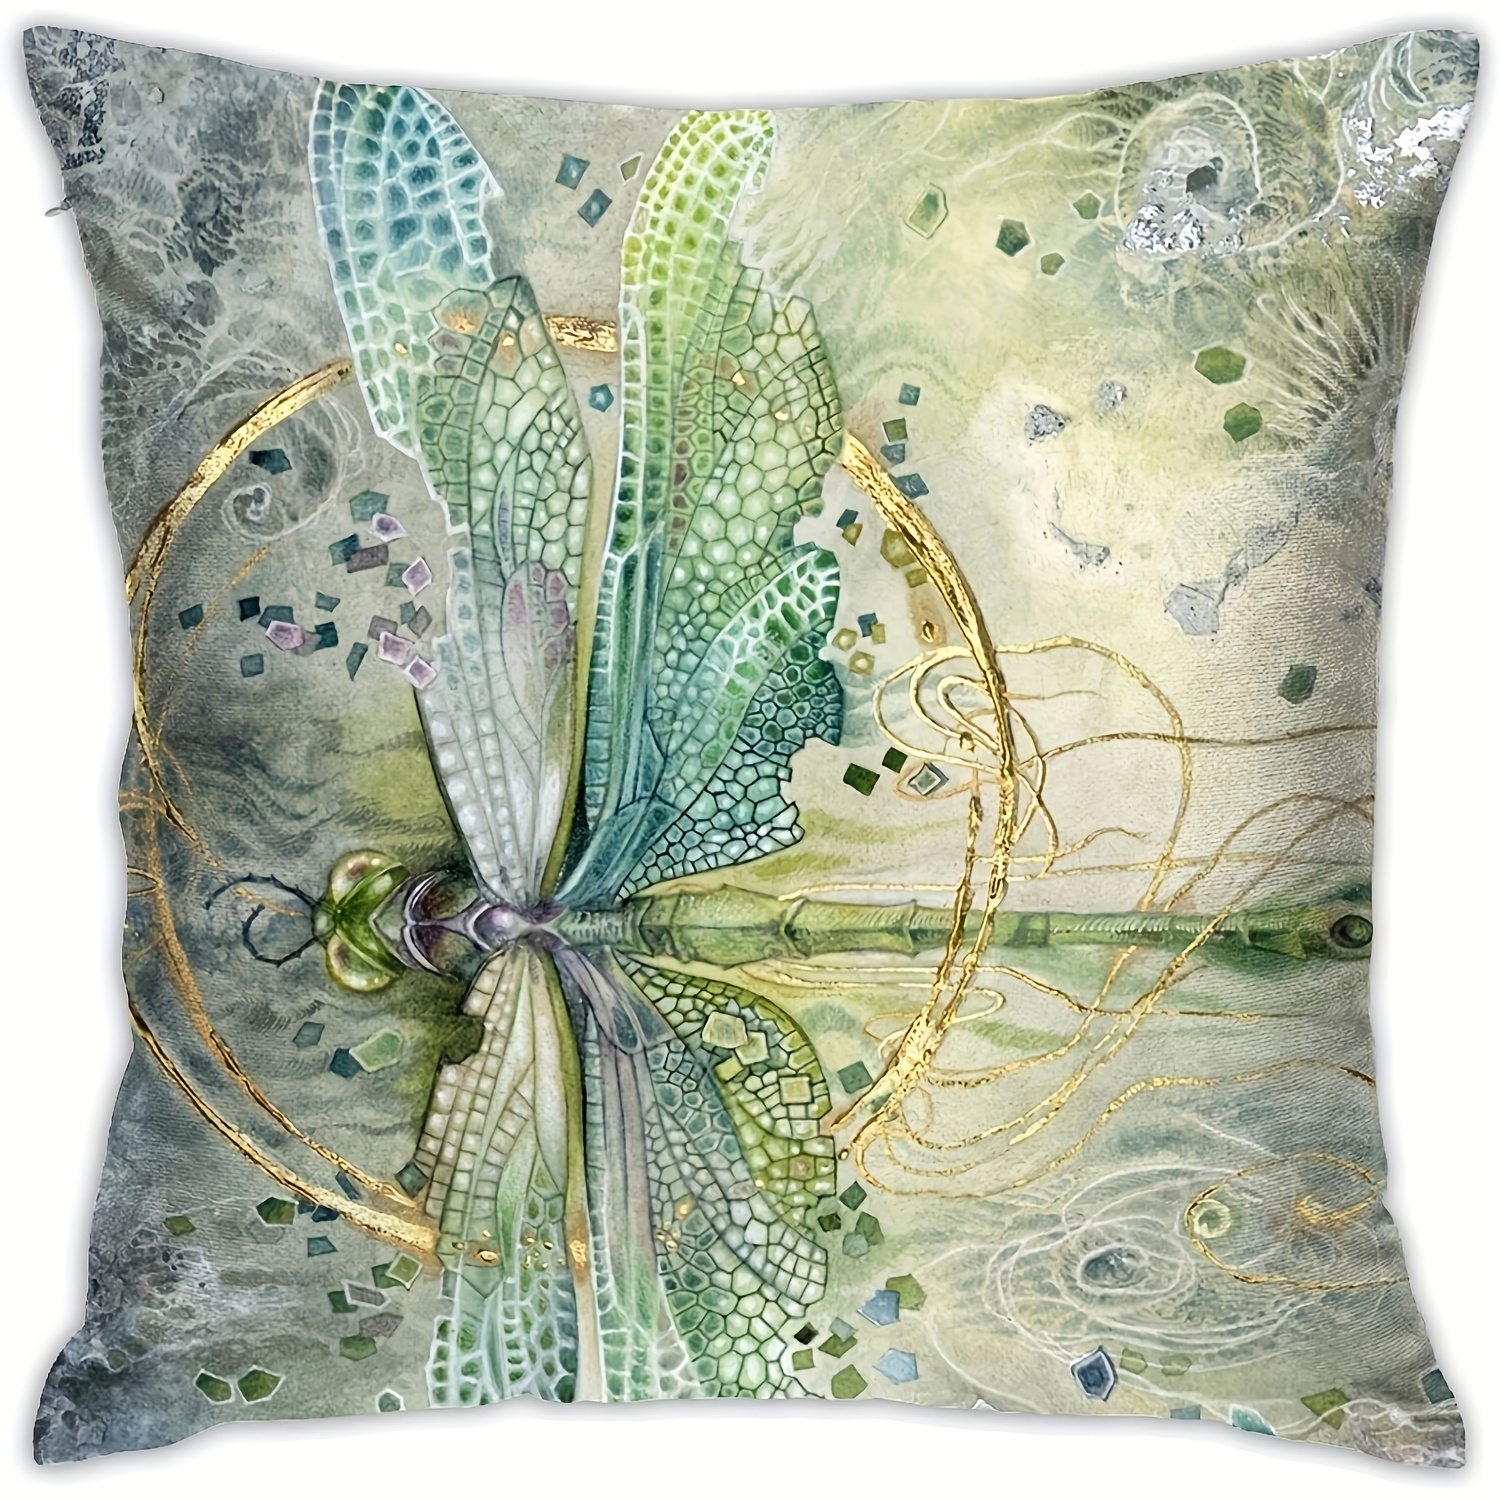 

1pc Retro Square Linen Cushion Cover, Vintage Green Paris Country Dragonfly Pillow Cover, Home Decor, Room Decor, Bedroom Decor, Collectible Buildings Accessories (cushion Is Not Included) 18x18inch